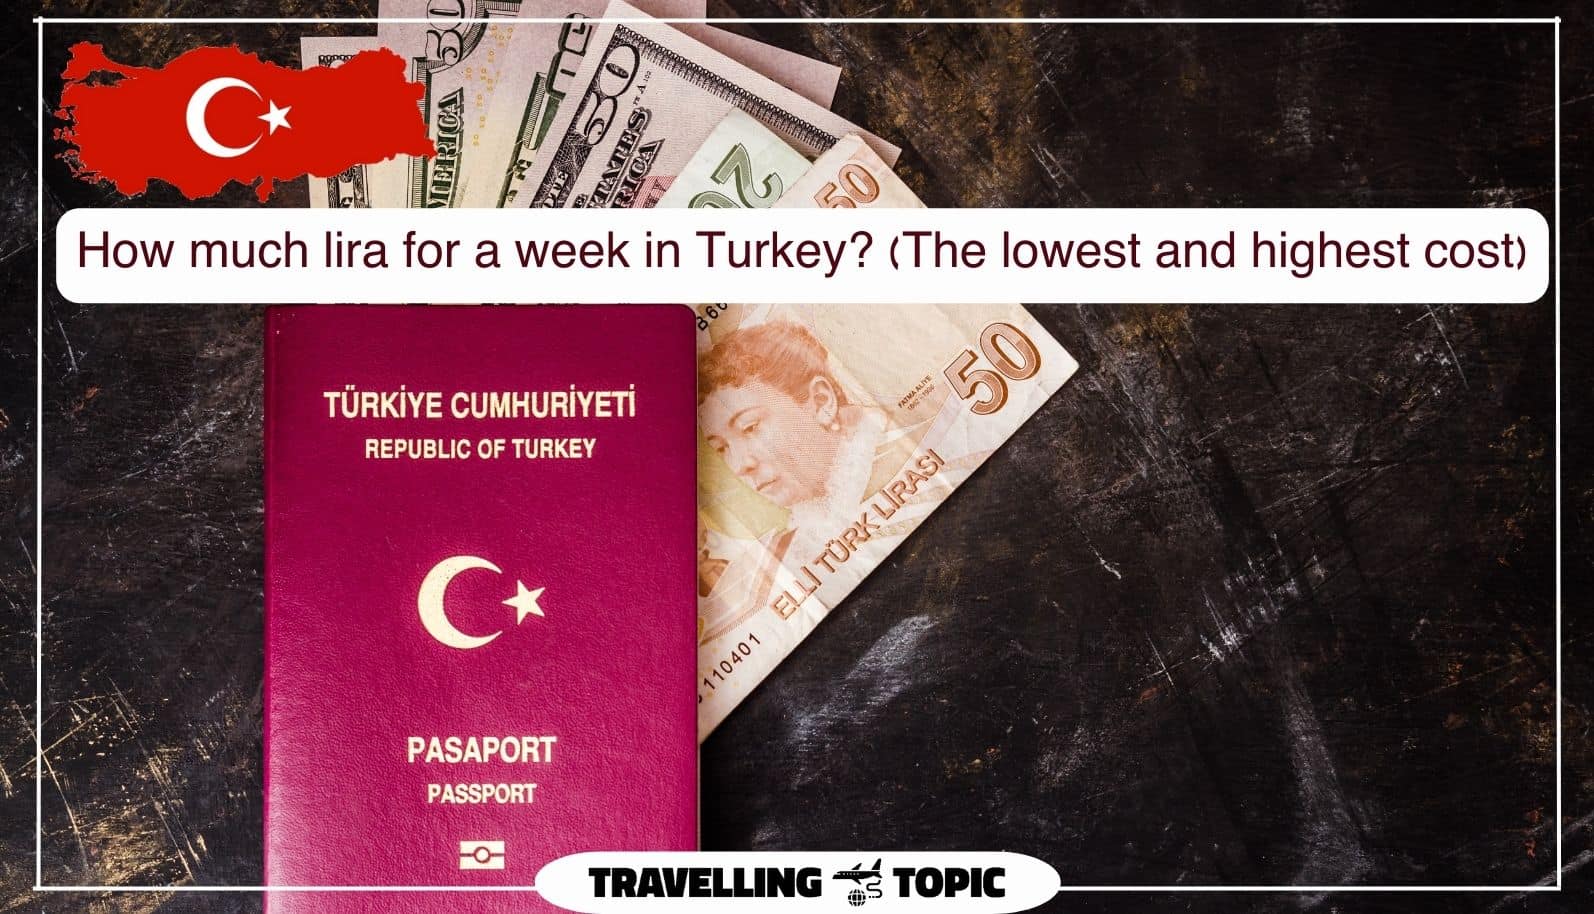 How much lira for a week in Turkey? (The lowest and highest cost)